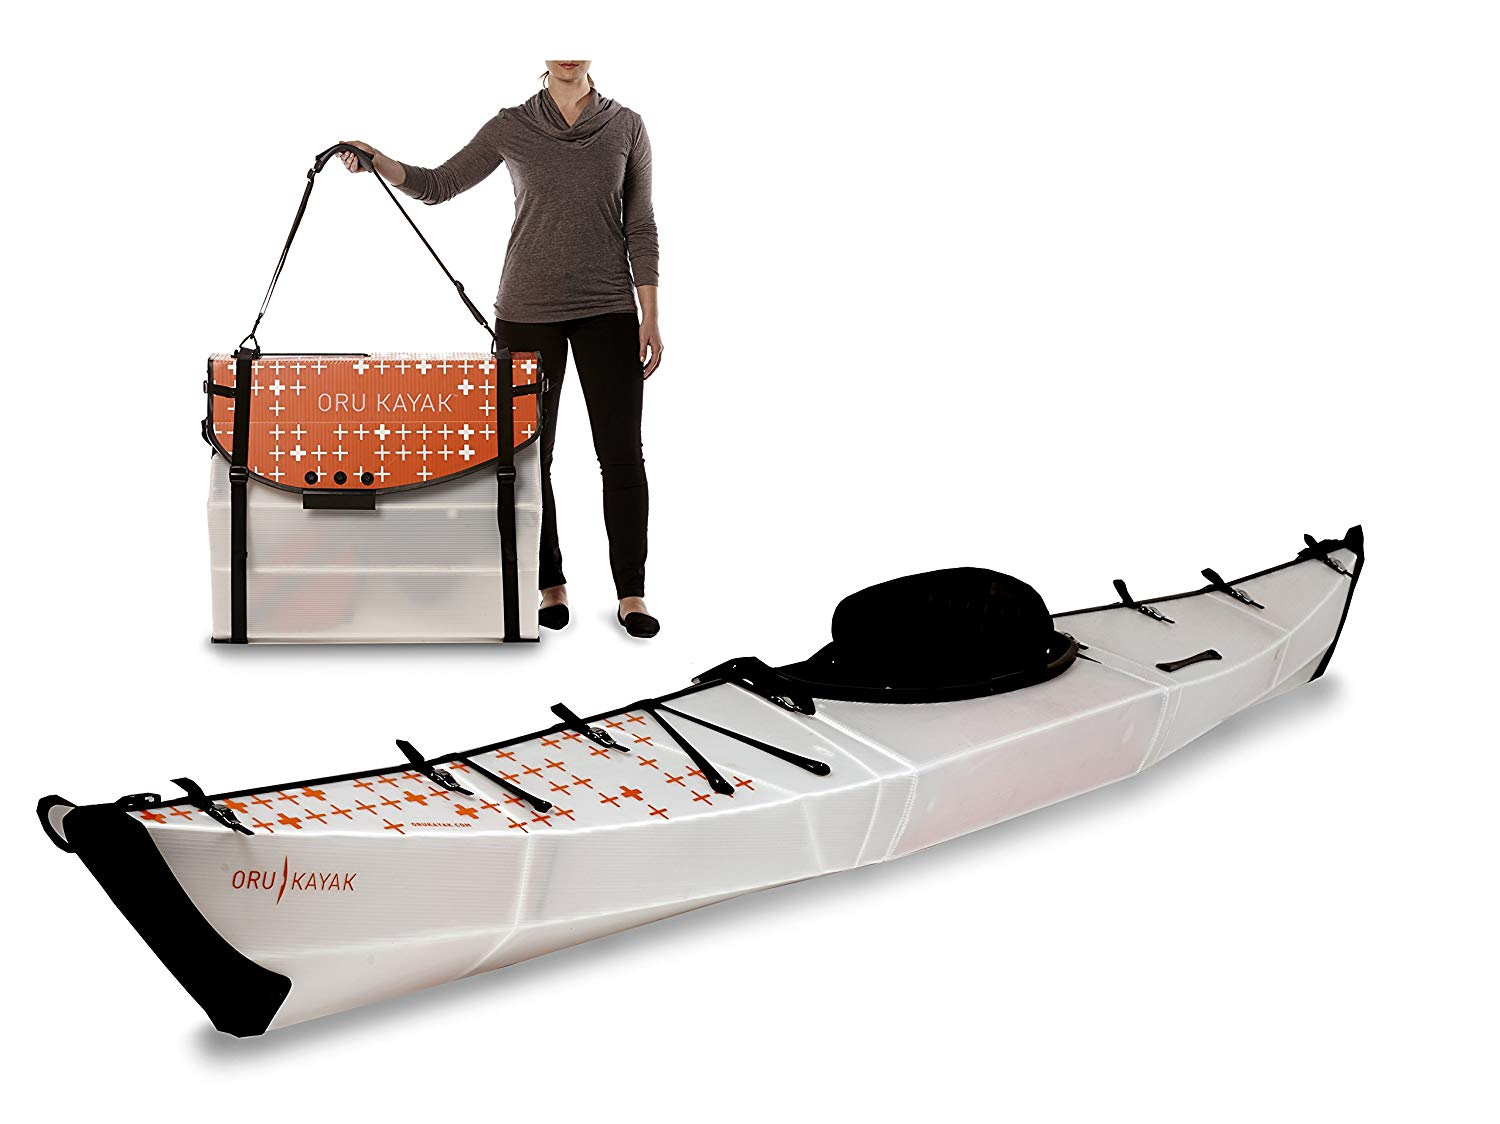 Kayaks are a fun way to make it out on the waterways. Unfortunately, if you live in an apartment you probably don't have room for one. Until now.<br><br>Grab a folding kayak and free up some space <a href="https://amzn.to/2ELoPNP" target="_blank" "nofollow">here</a>.